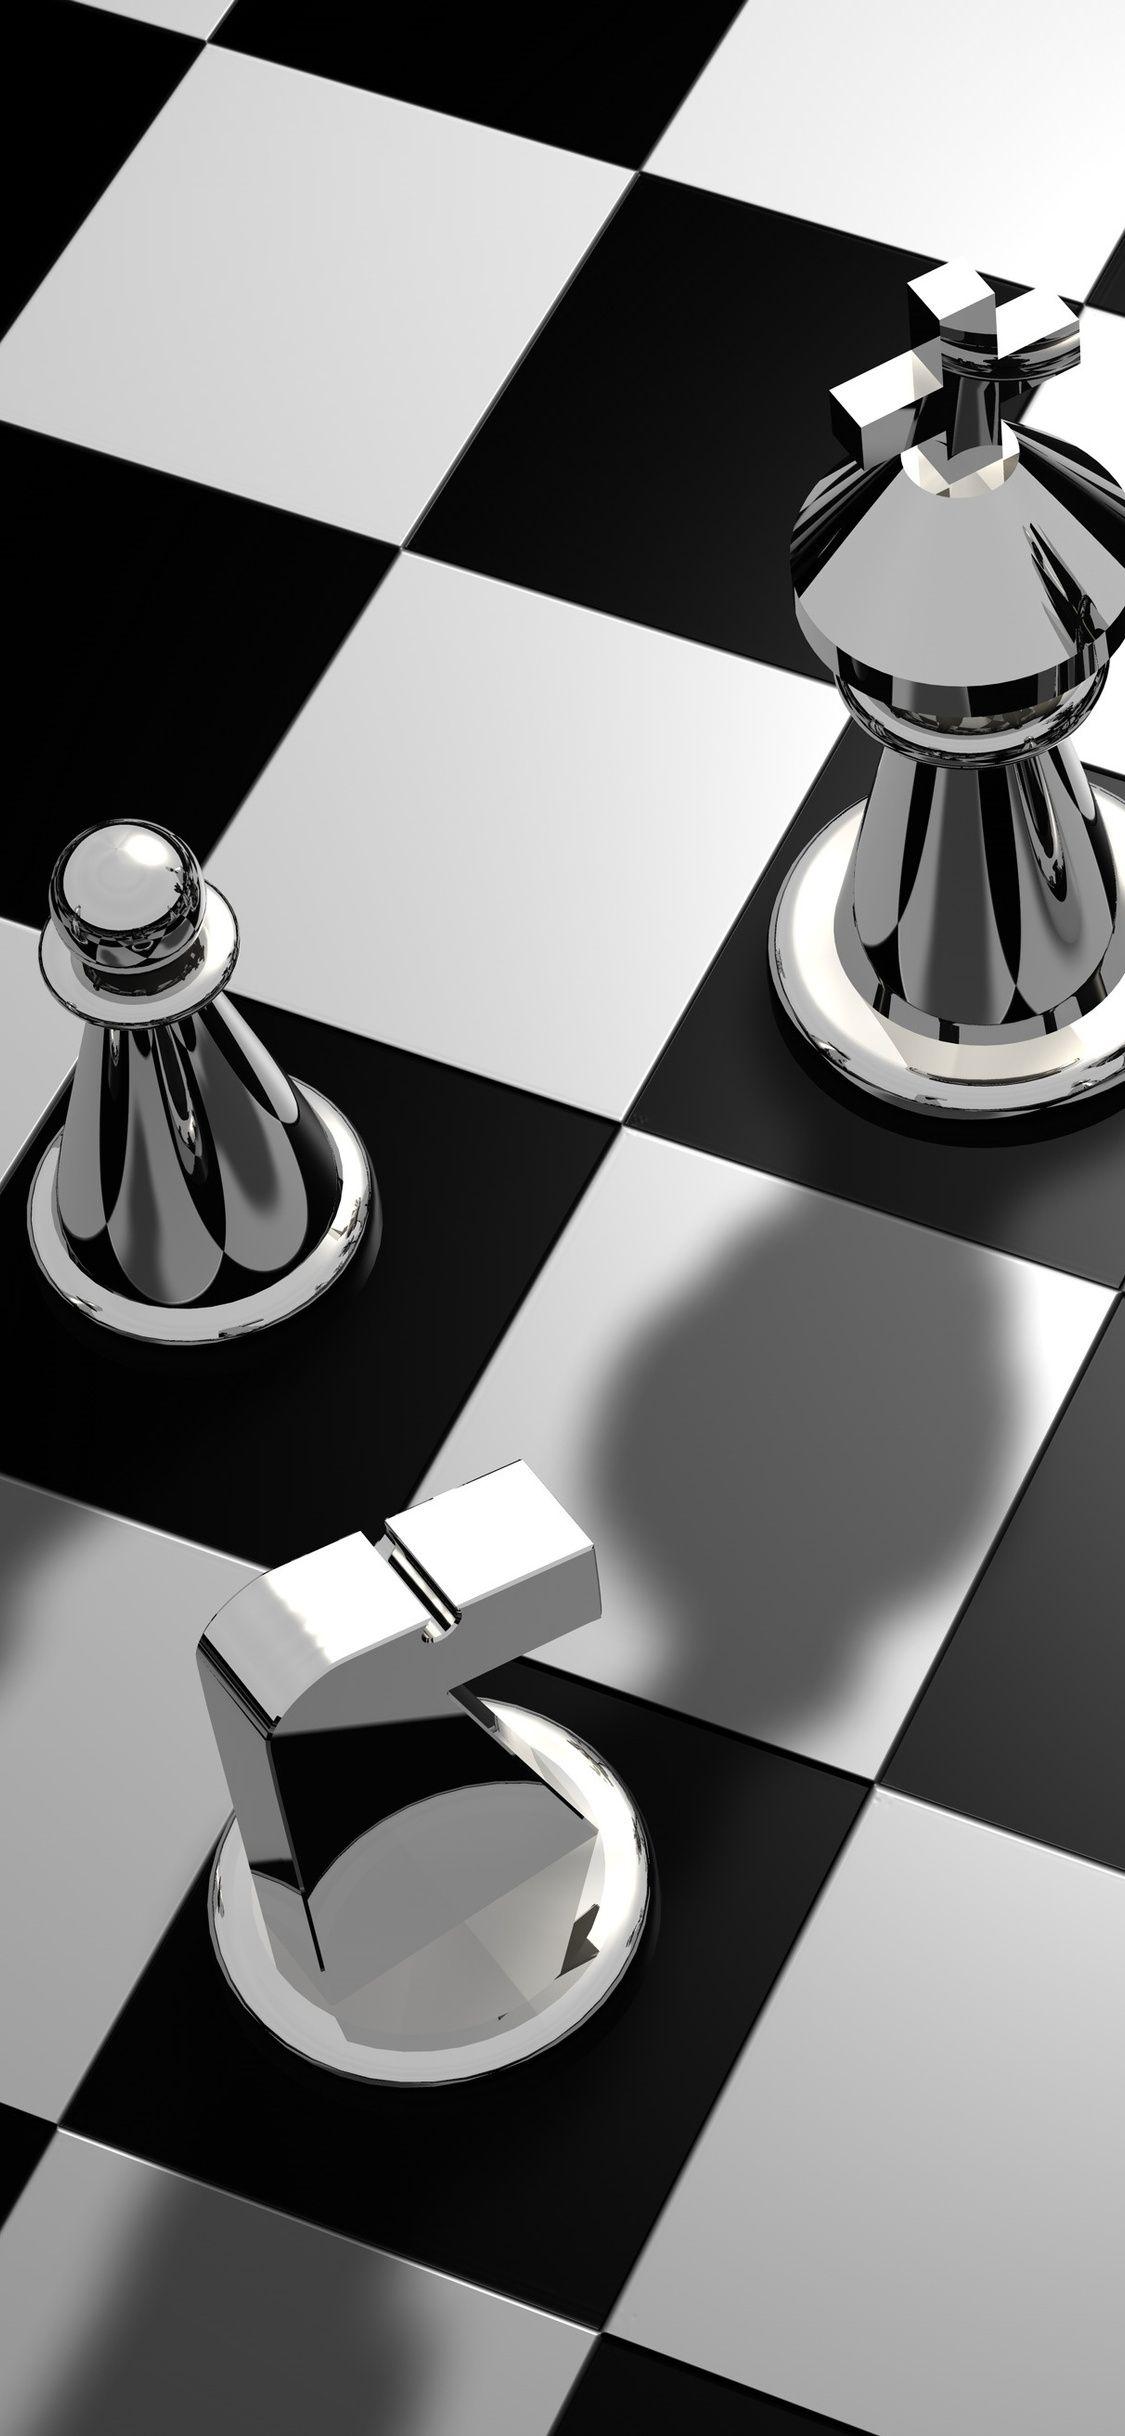 Mobile wallpaper: Chess, 3D, Glass, Game, Cgi, 686241 download the picture  for free.